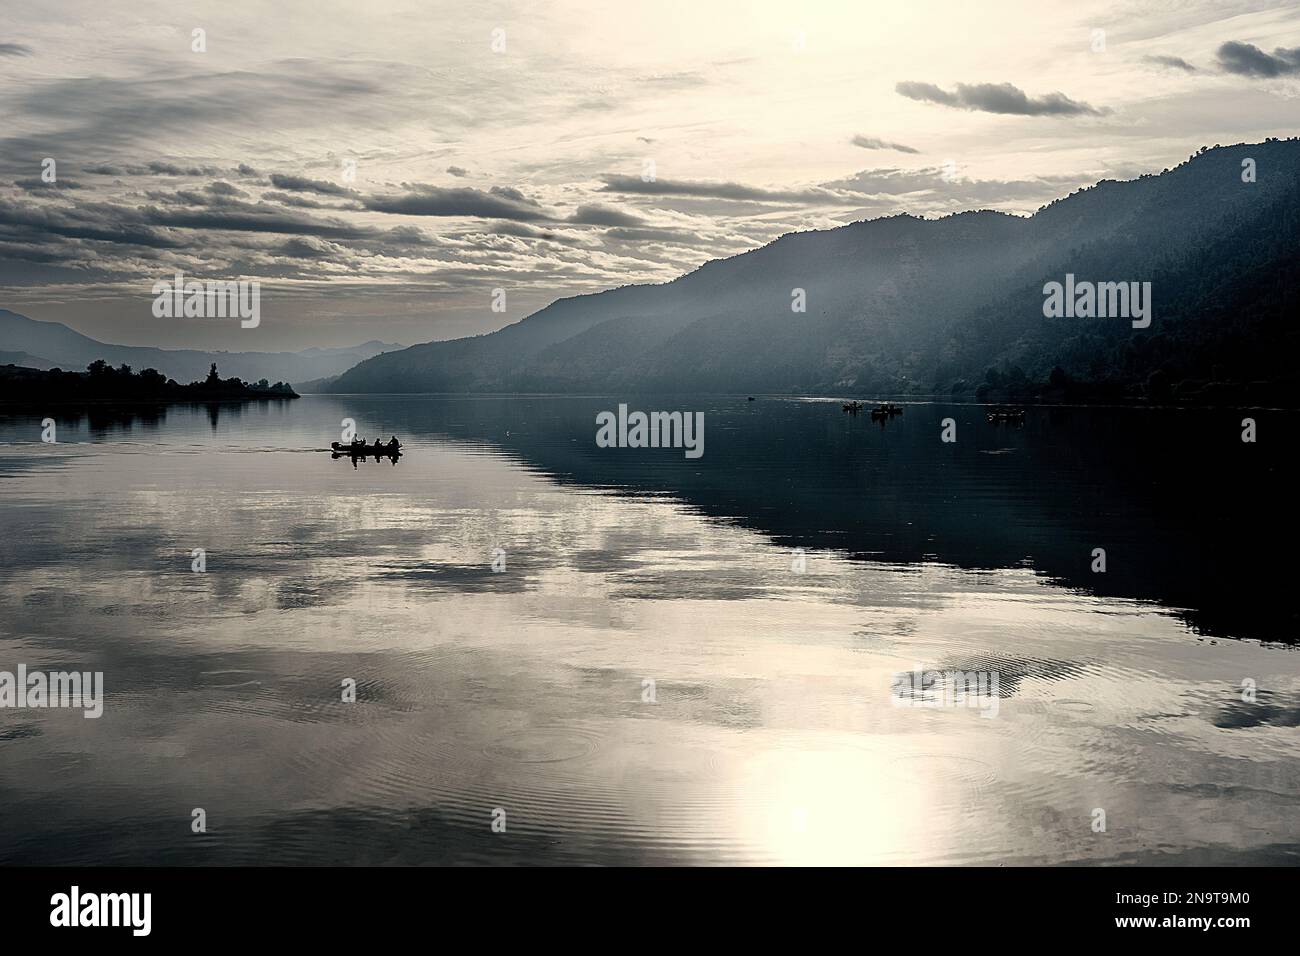 Boats with anglers on a reservoir of the Rio Ebros near Mequinenza in Catalonia, Spain Stock Photo